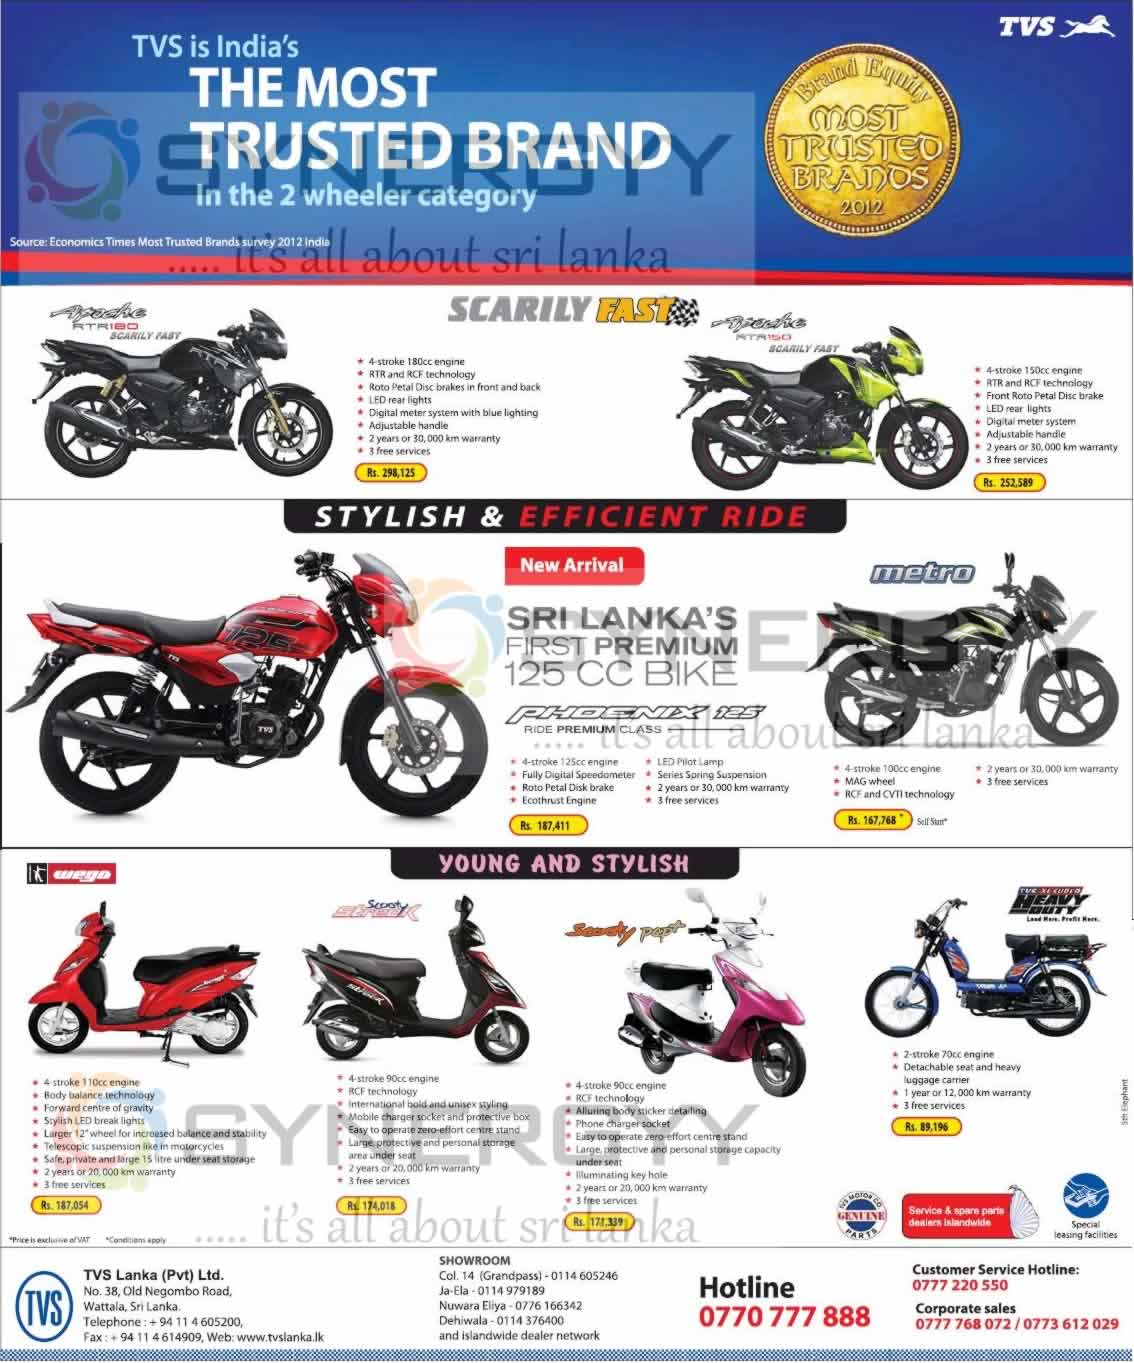 Tvs Motor Cycle Prices In Sri Lanka Updated On July 2013 Synergyy